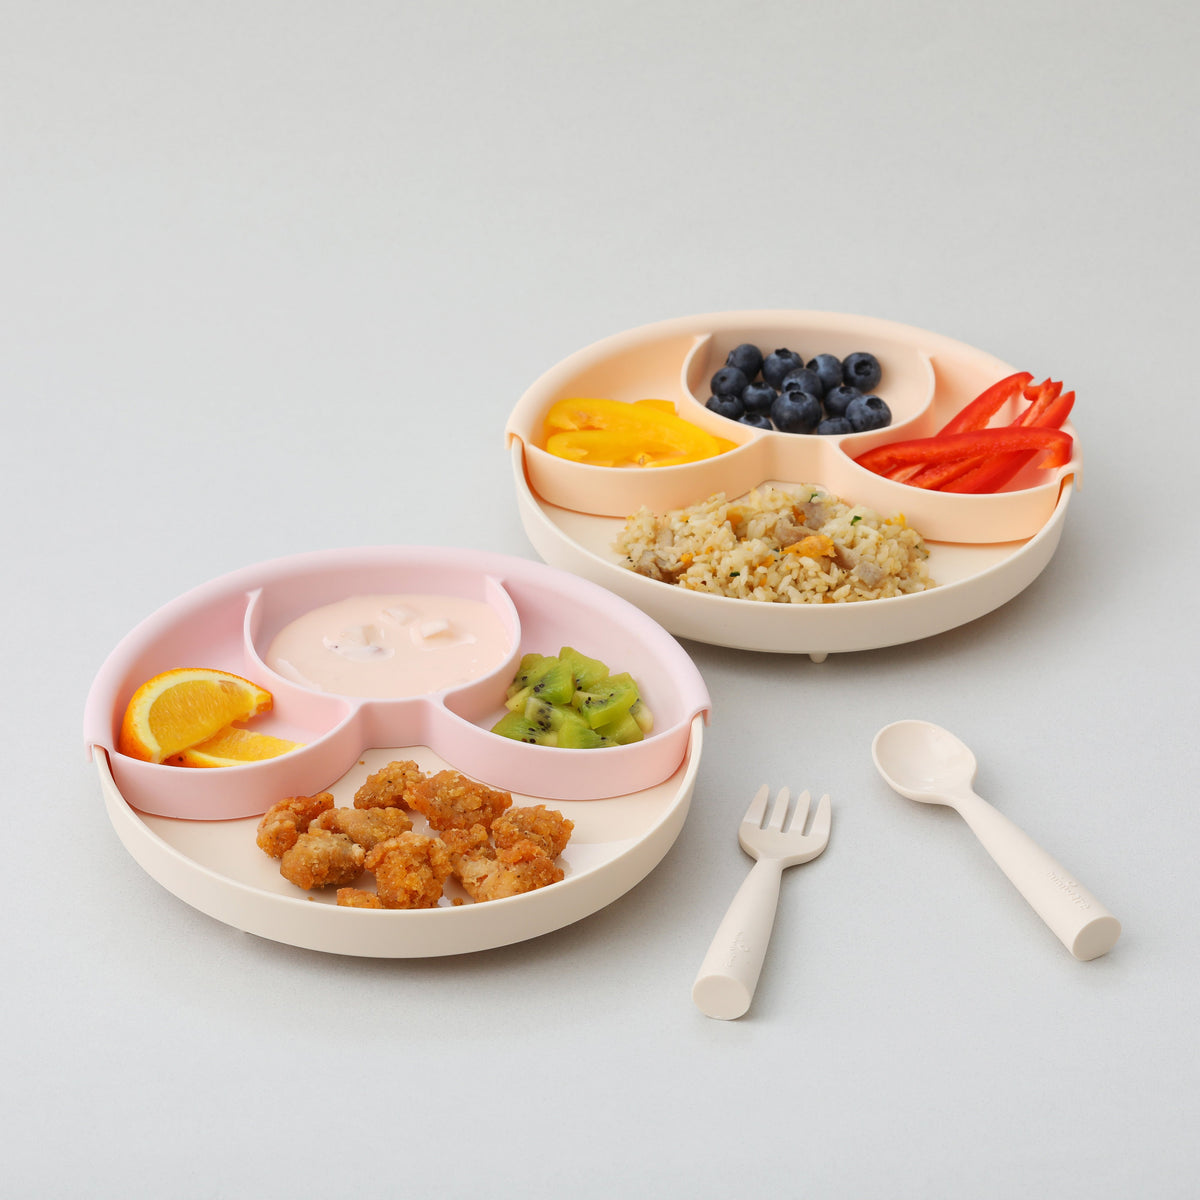 miniware-healthy-meal-set-pla-smart-divider-suction-plate-in-vanilla-silicone-divider-in-aqua- (6)